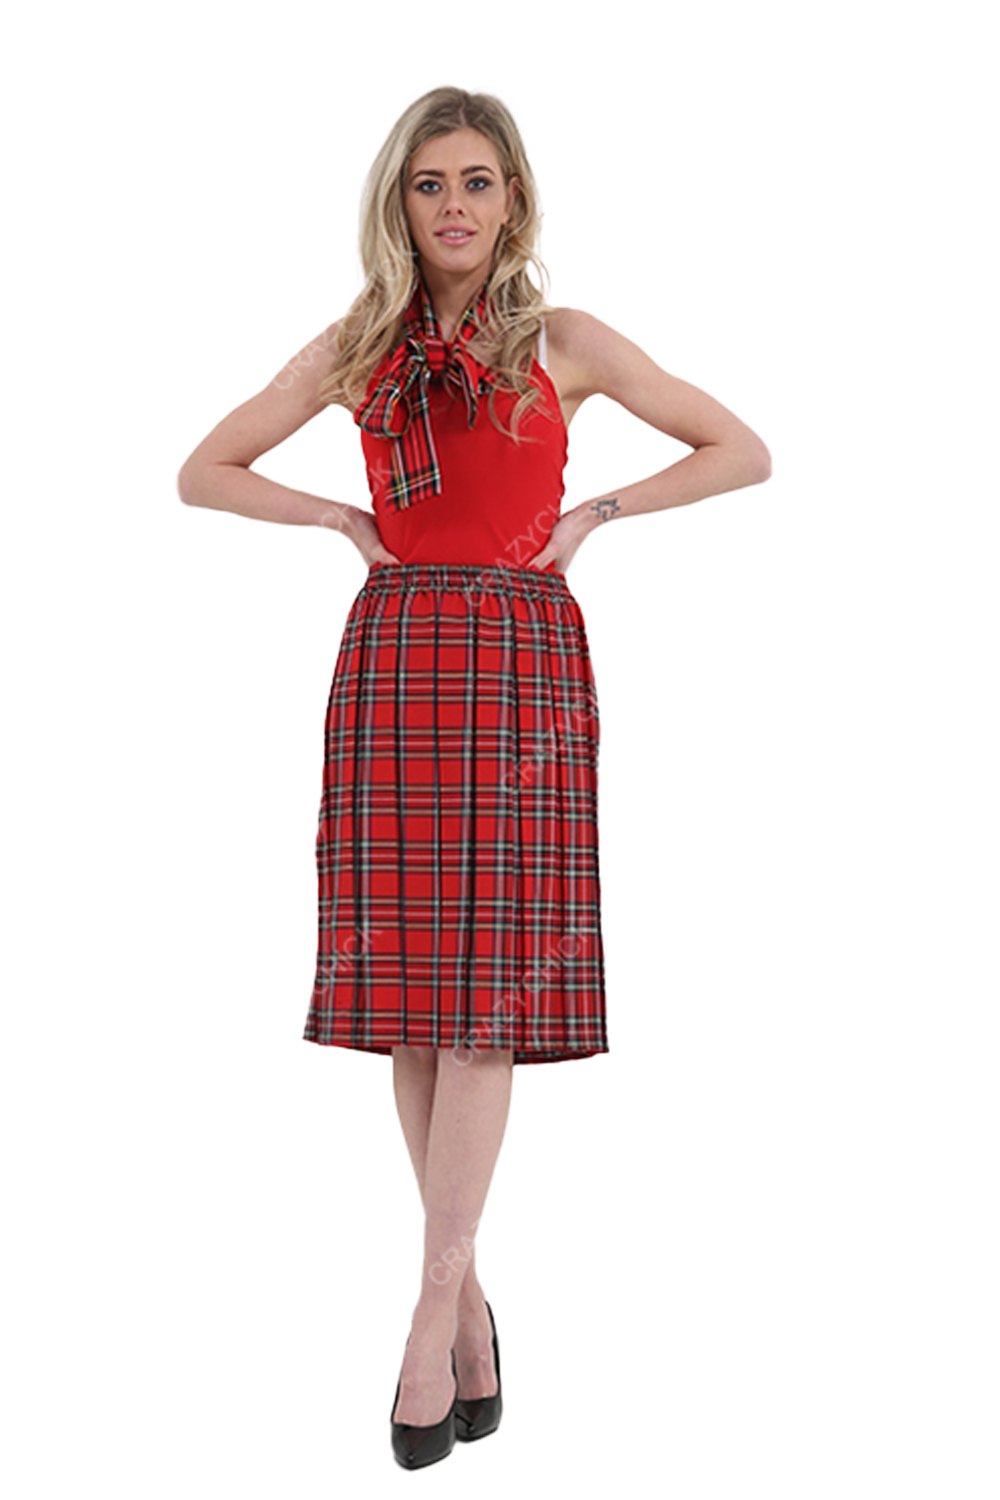 Crazy Chick Adult 26 Inches Red Box Pleated Tartan Skirt